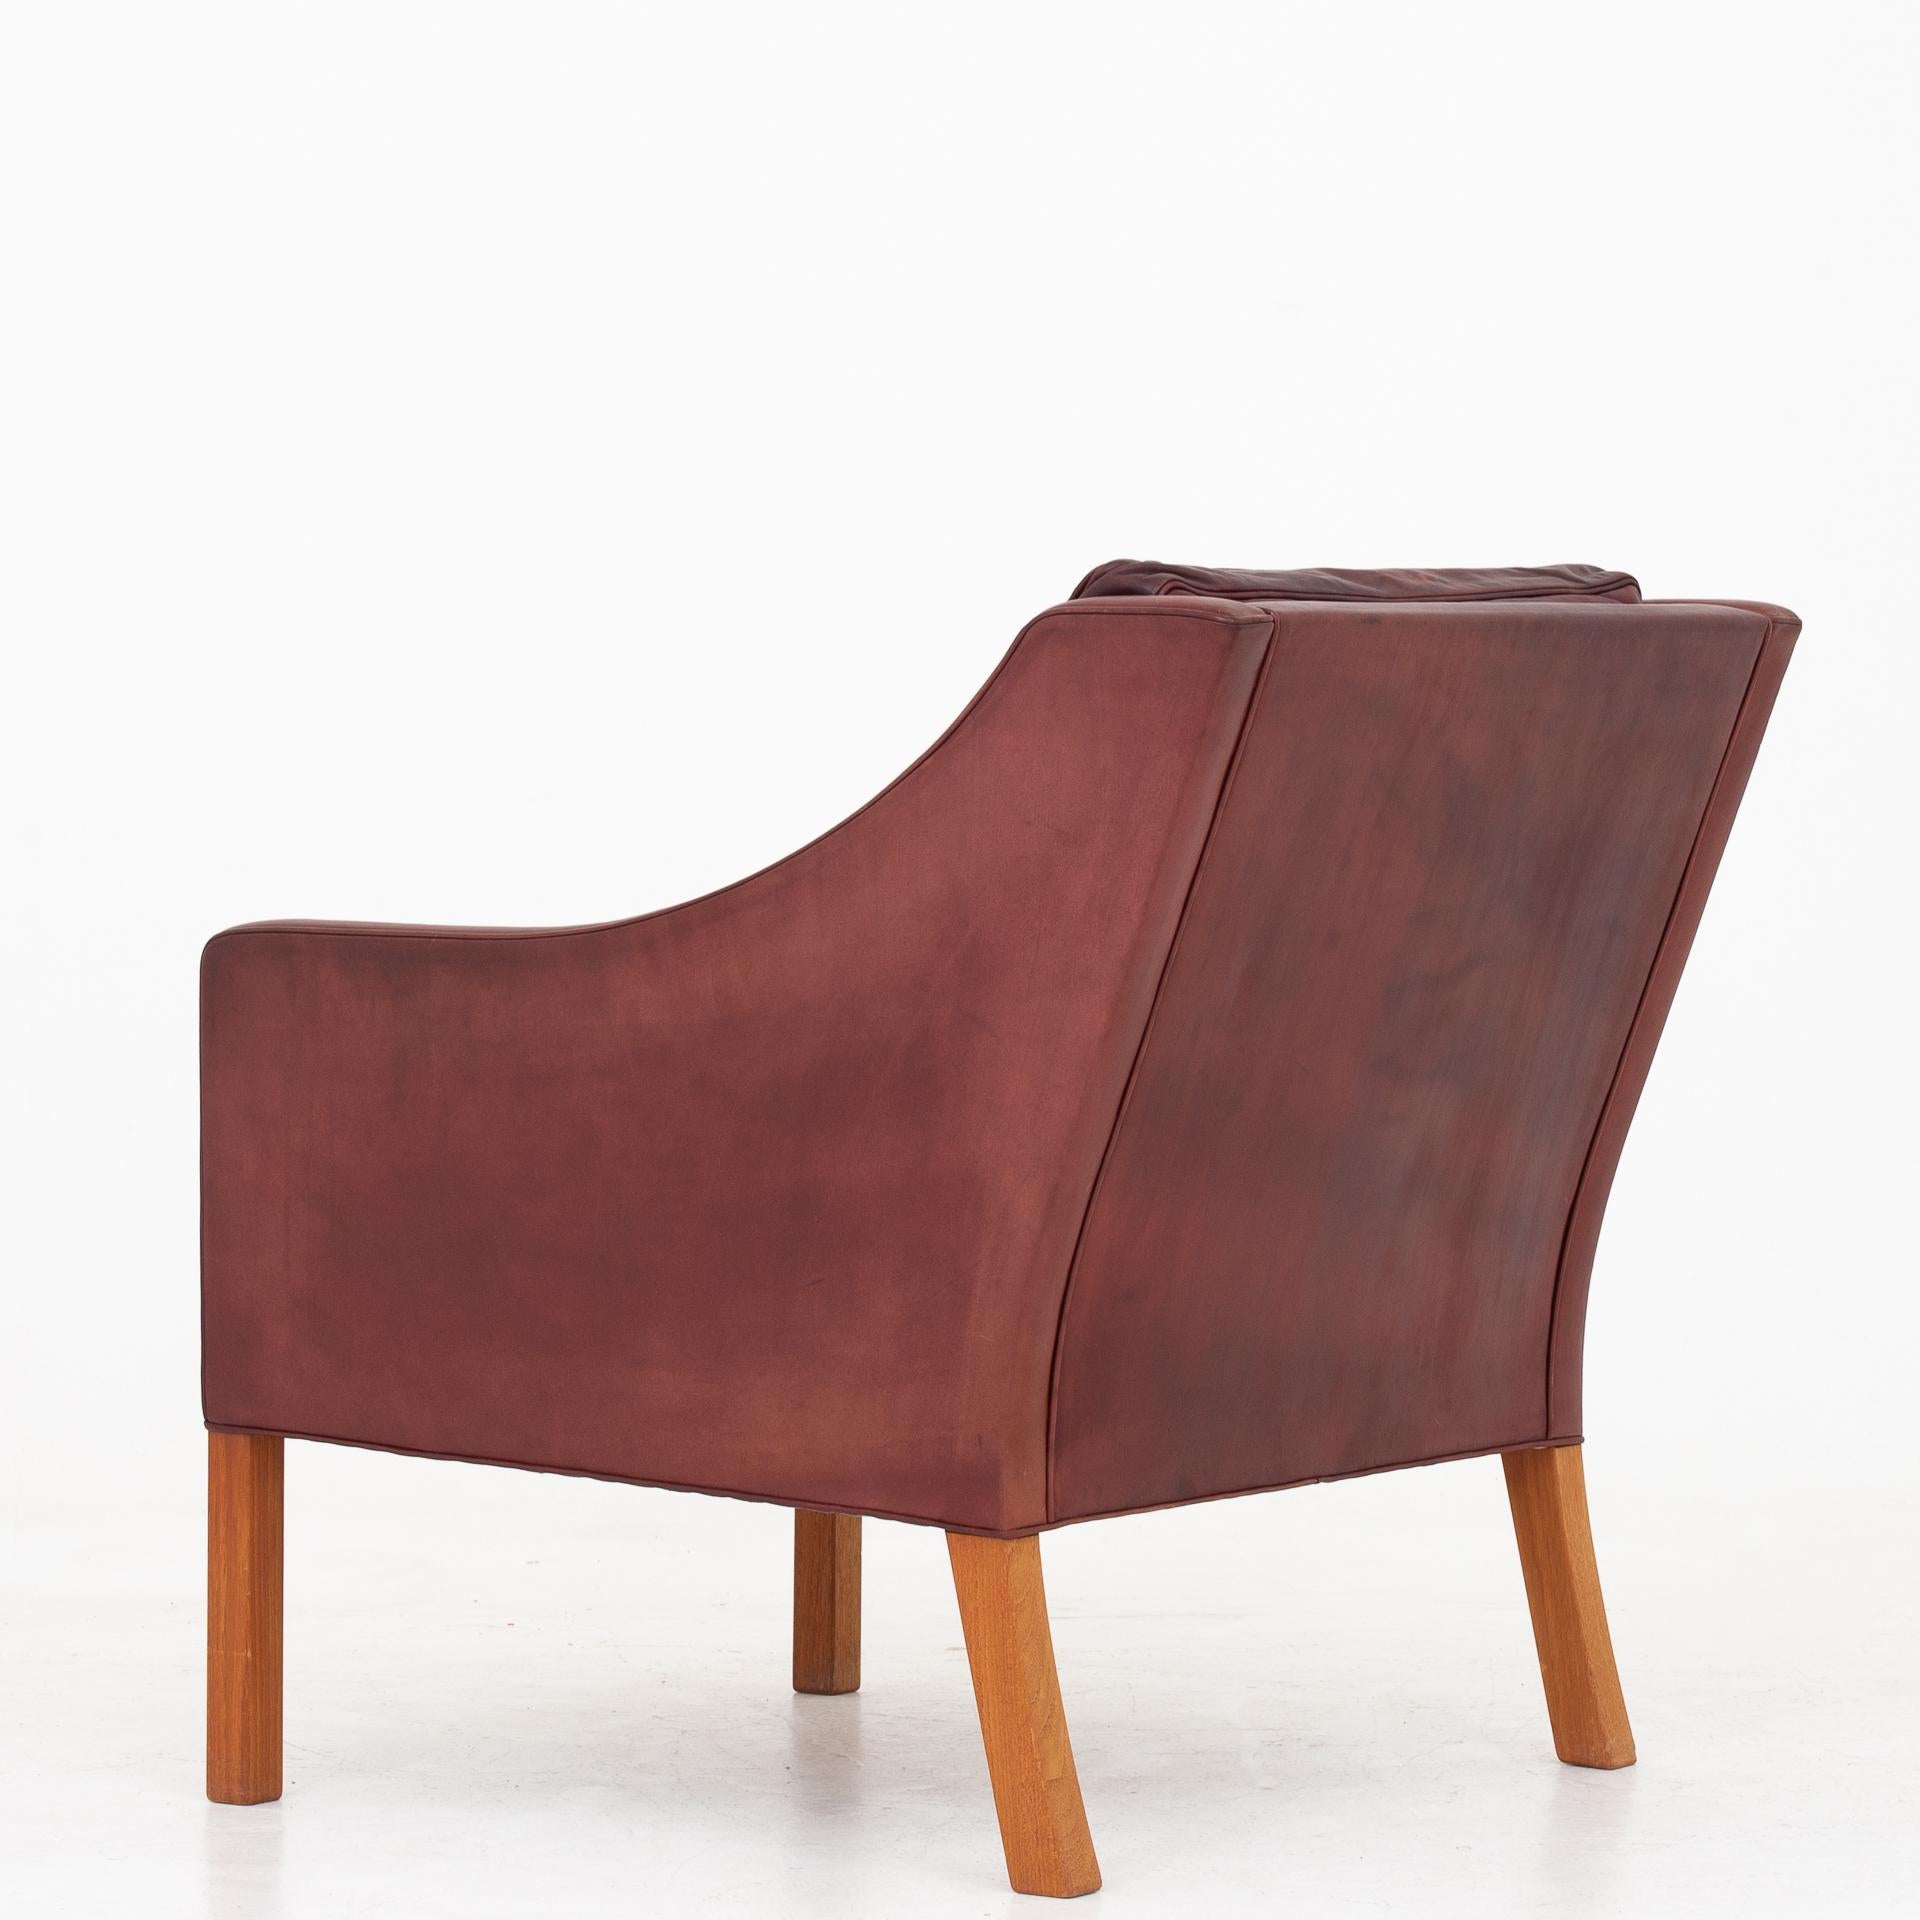 BM 2207 - Easy chair in original patinated leather with legs of teak. Maker Fredericia Furniture.